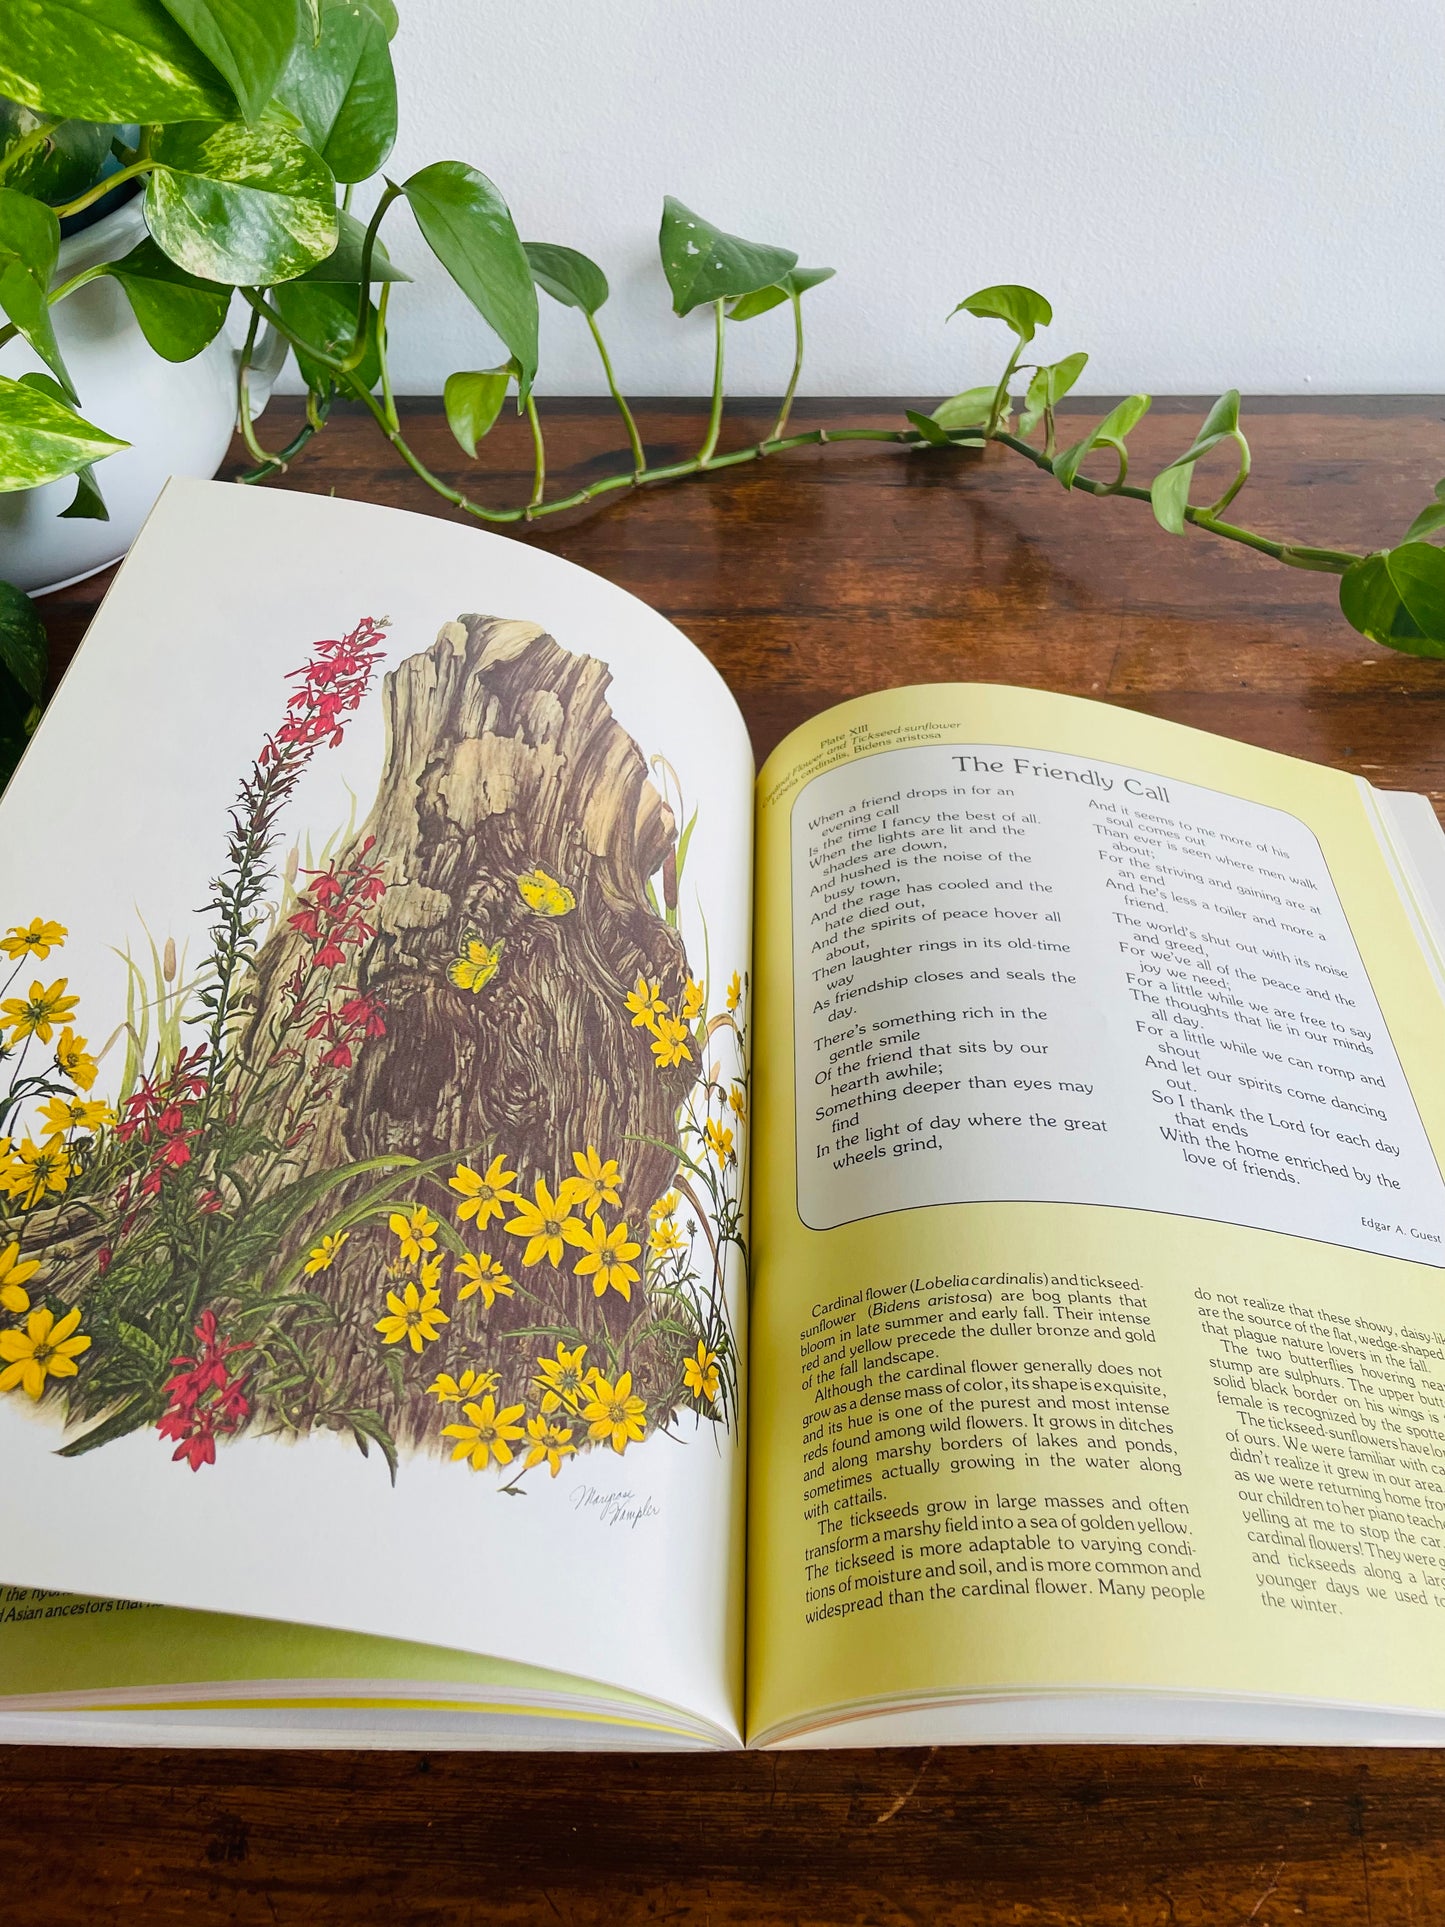 Flowers of Friendship Book Illustrated by Maryrose Wampler (1977)